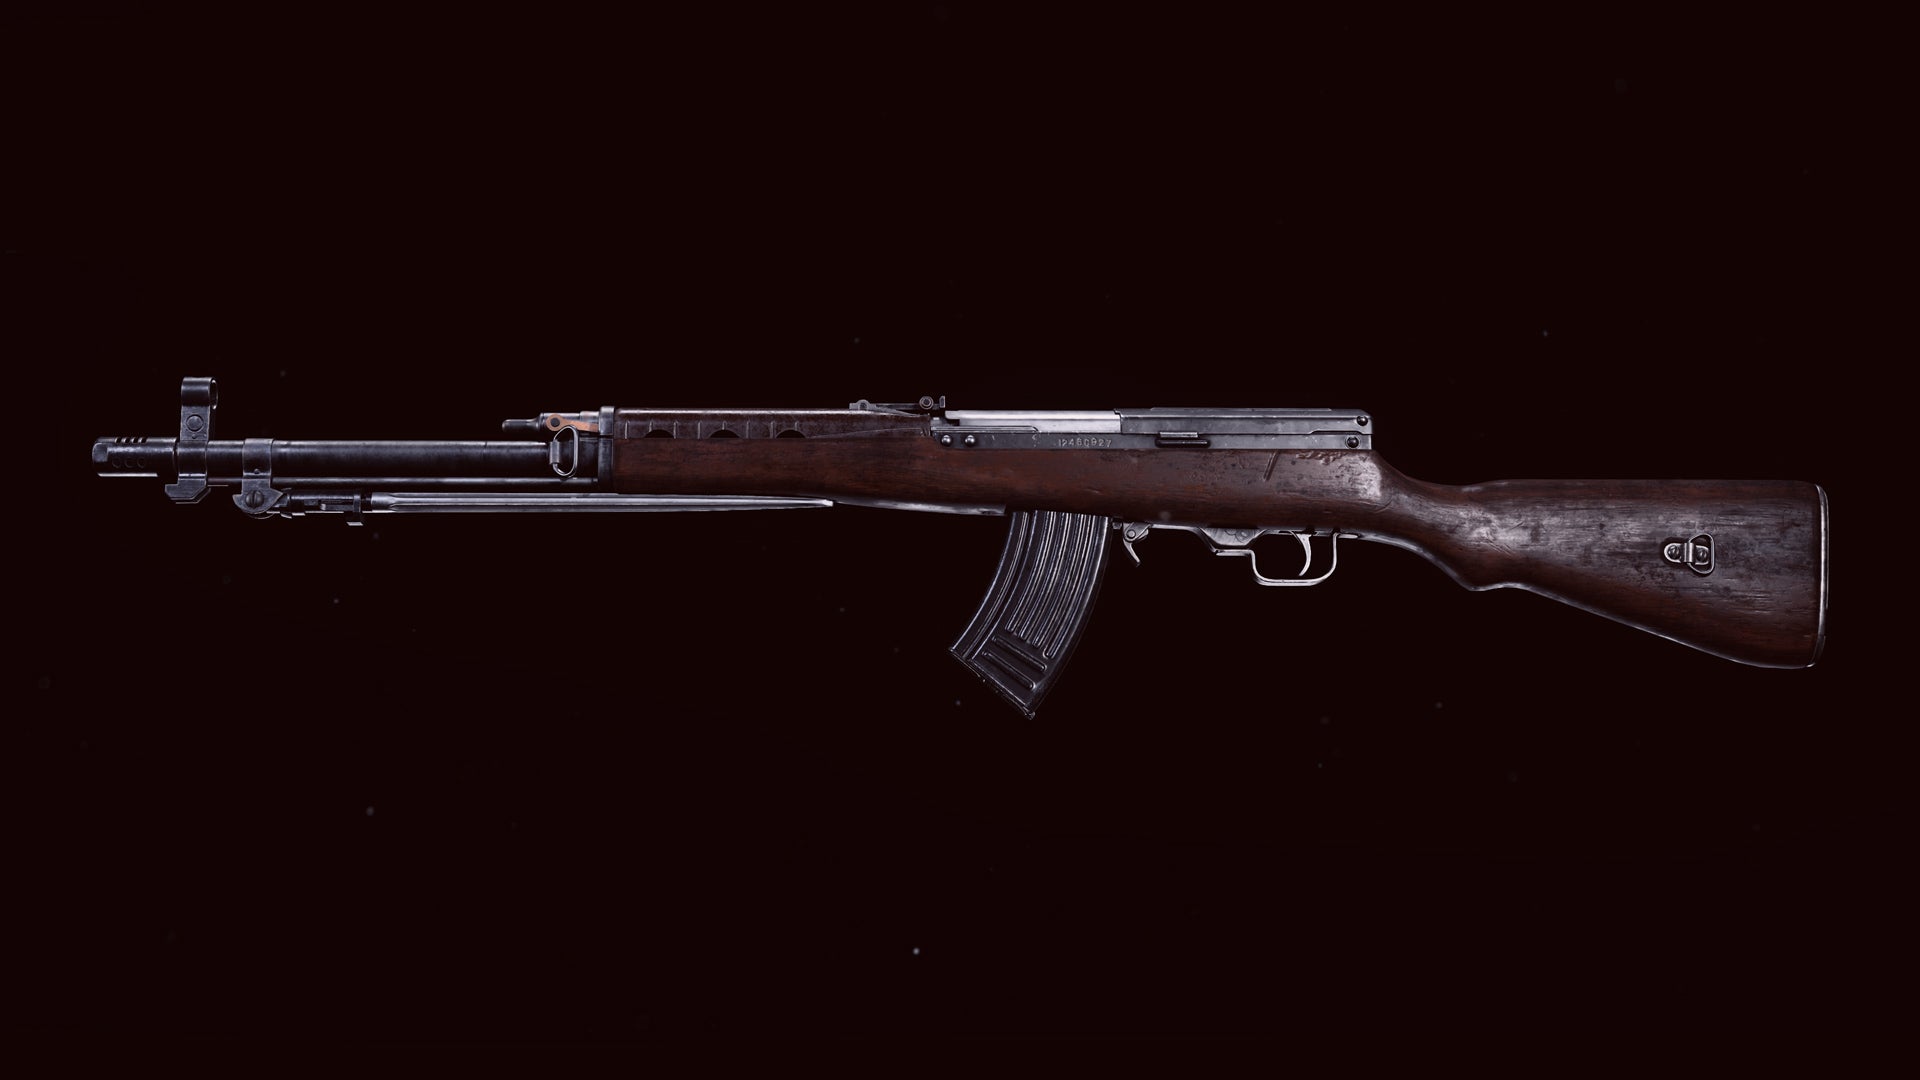 A screenshot of the Type 63 as it appears in the Call of Duty: Warzone Gunsmith.